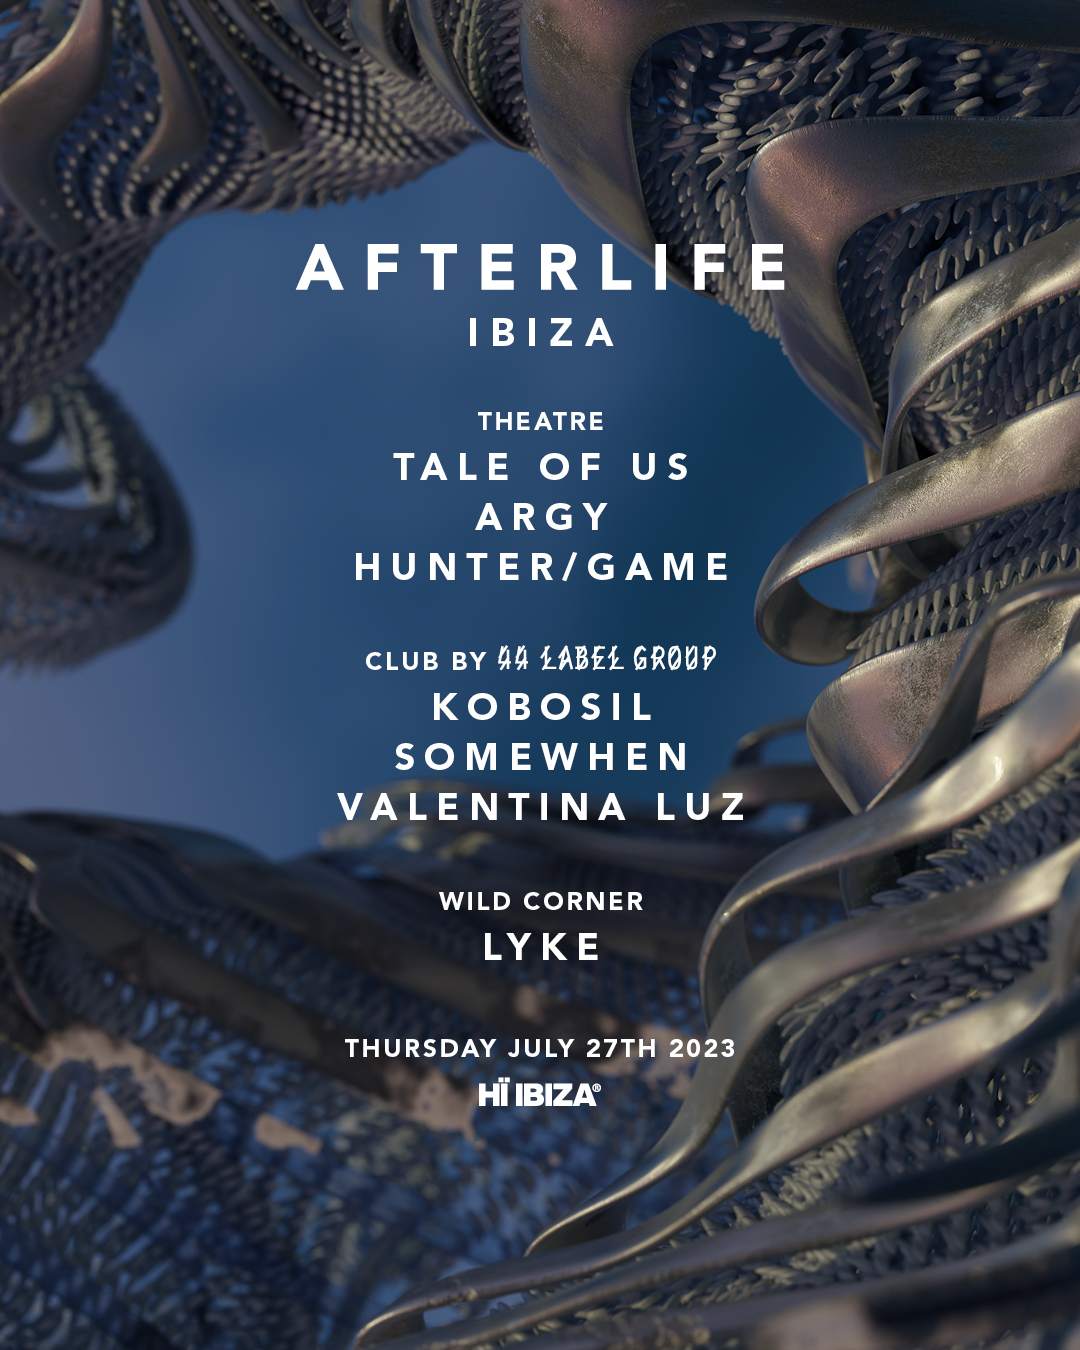 Tale Of Us Ibiza, Afterlife Hï Ibiza 2023 - Official Tickets